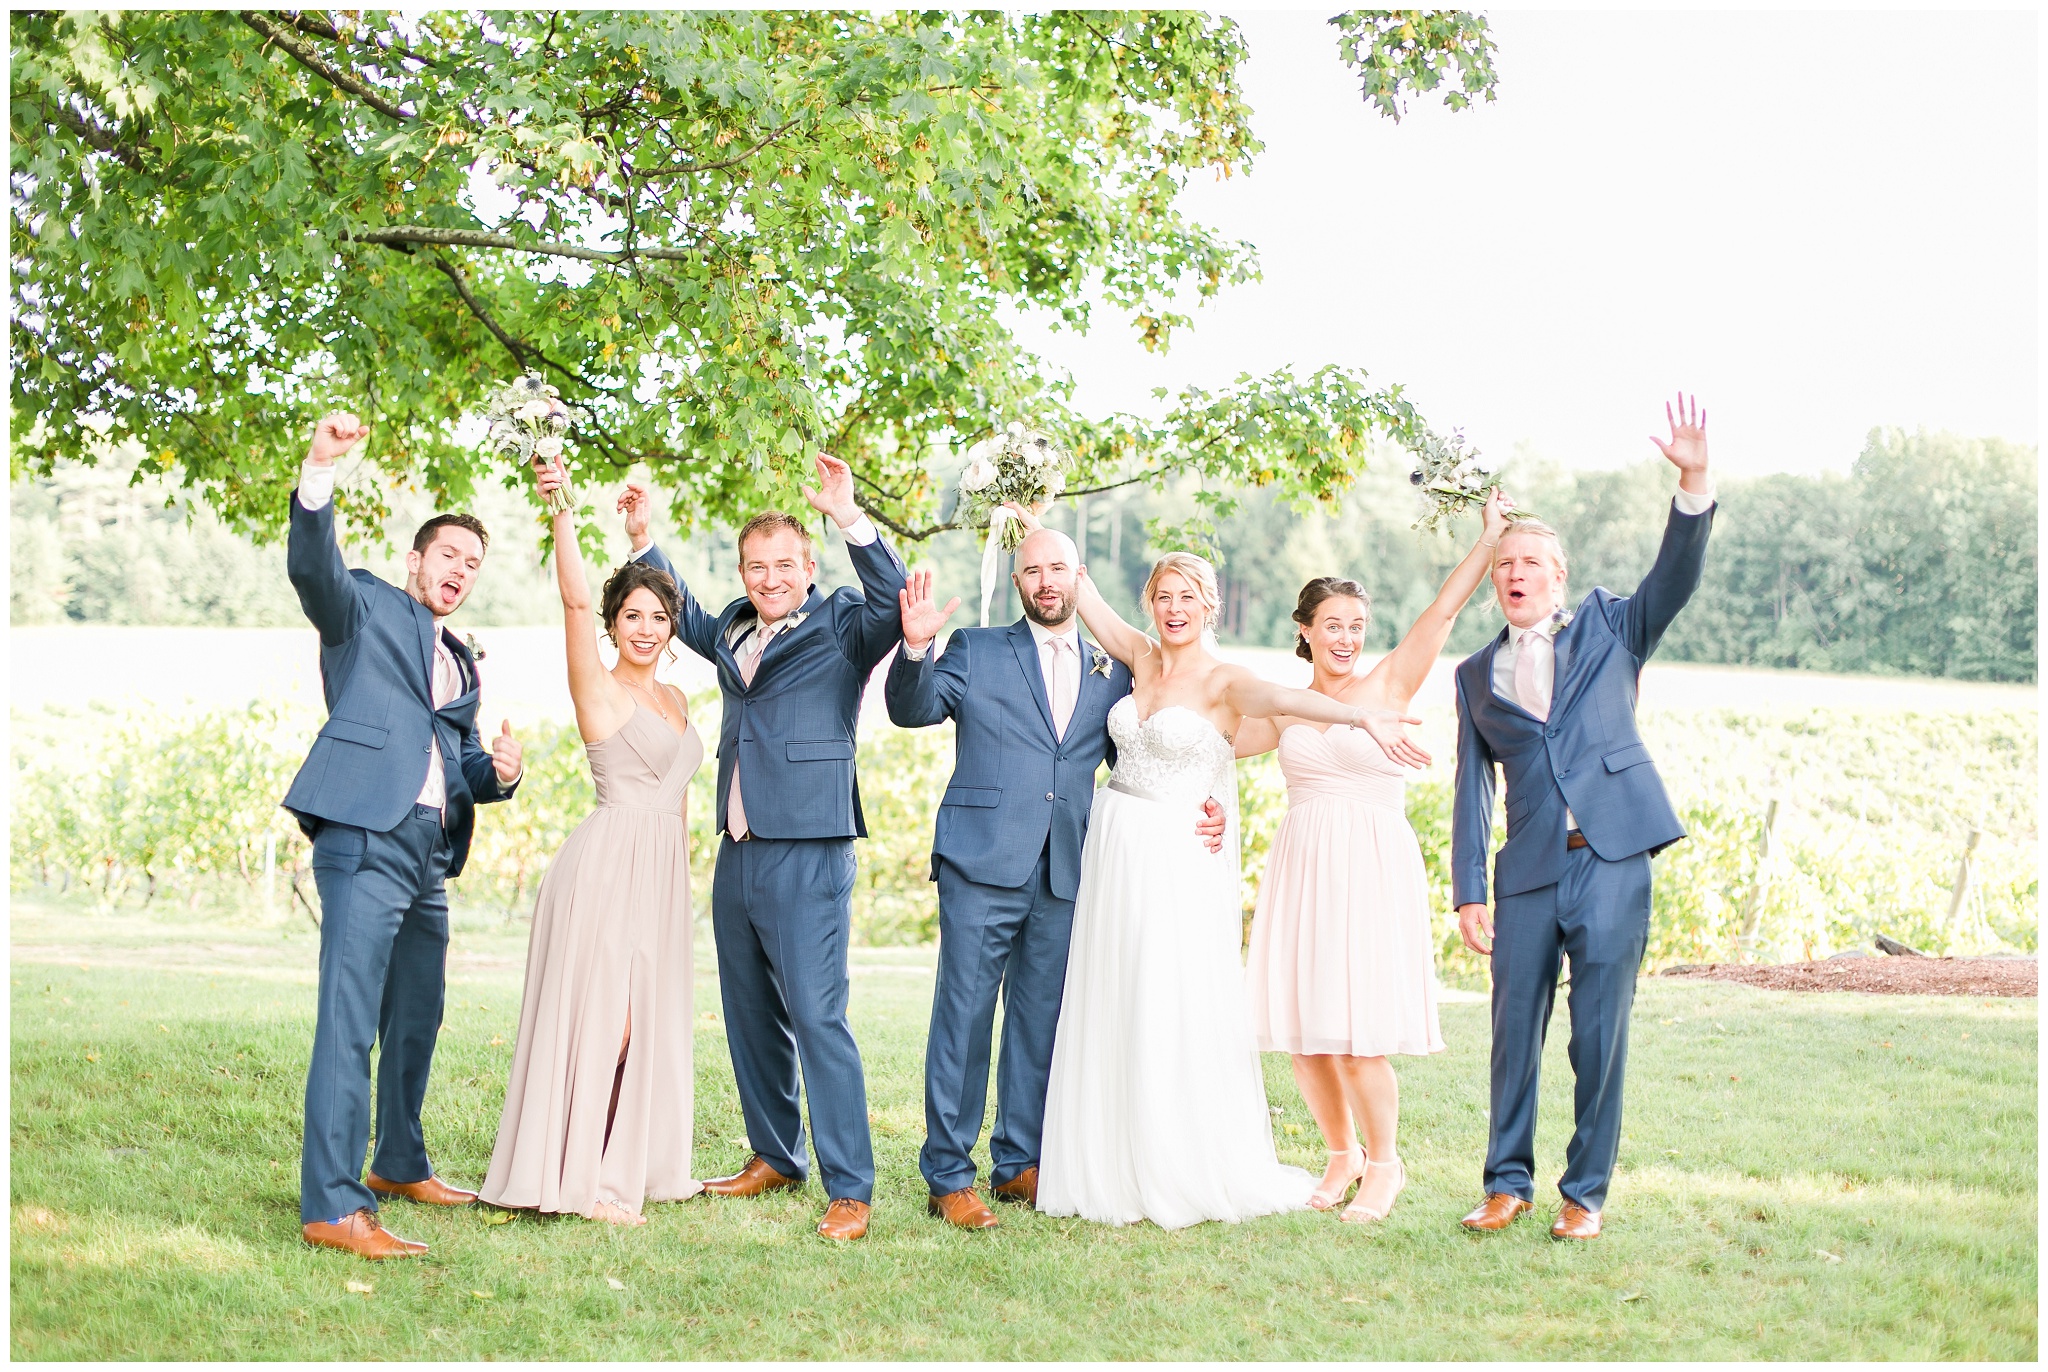 New Hampshire Wedding Photographer | Amy Brown Photography | Flag Hill Winery Outdoor NH Wedding 